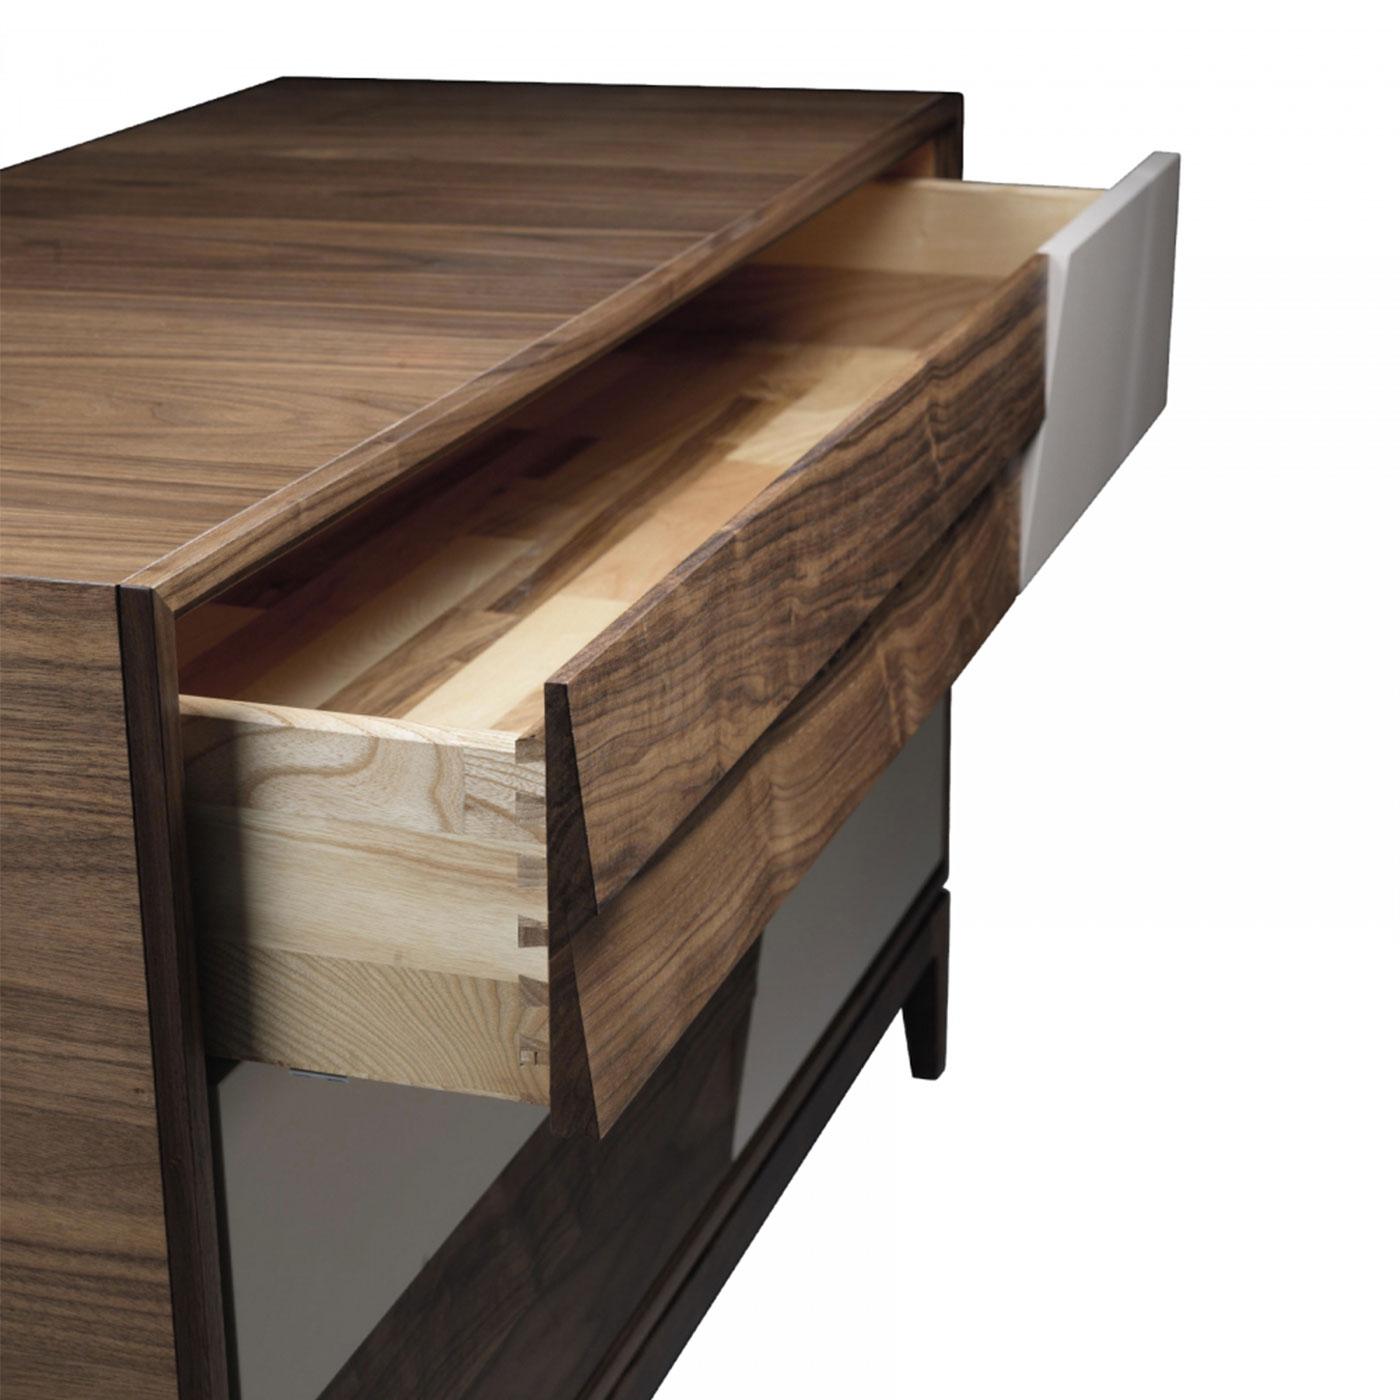 Made in Italy craftsmanship shines through the Colore solid wood dressers. With blockboard structure and slightly inclined drawers, they are made by expert hands from high-quality solid walnut with lacquered insert and acrylic finish. A modern yet